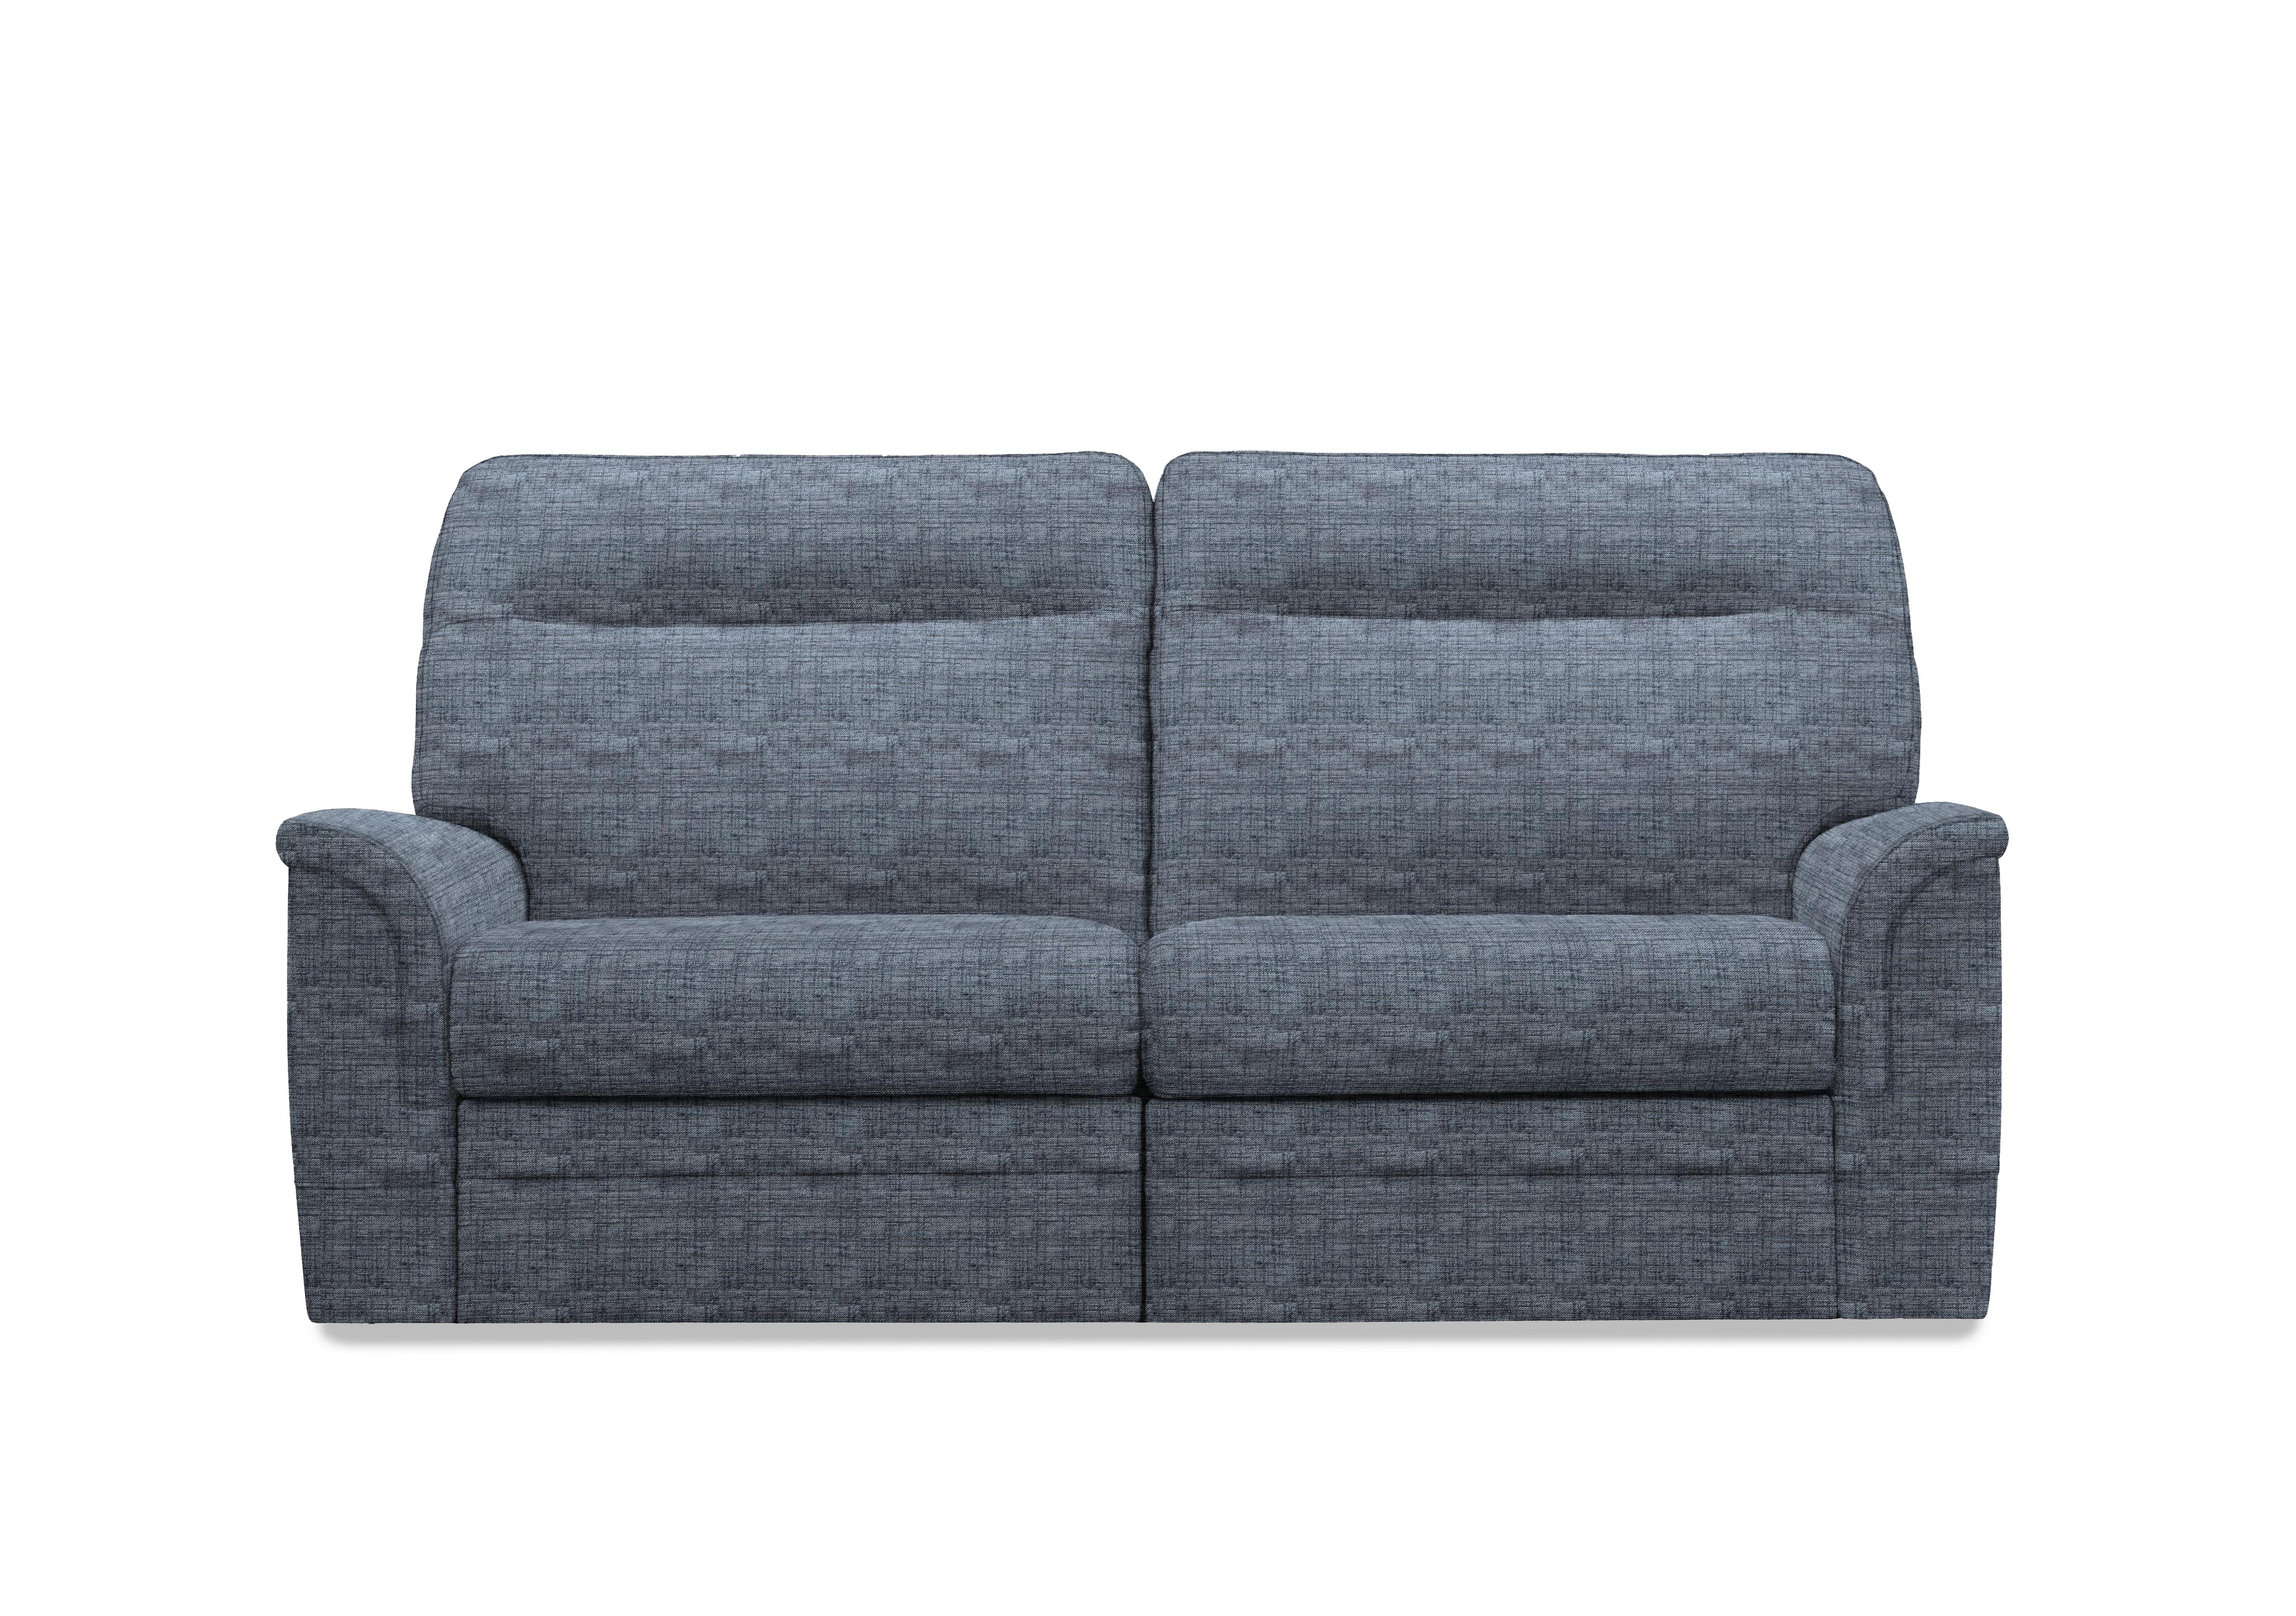 Hudson 23 Large 2 Seater Fabric Power Recliner Sofa with Power Headrests and Power Lumbar in Dash Blue 001497-0080 on Furniture Village